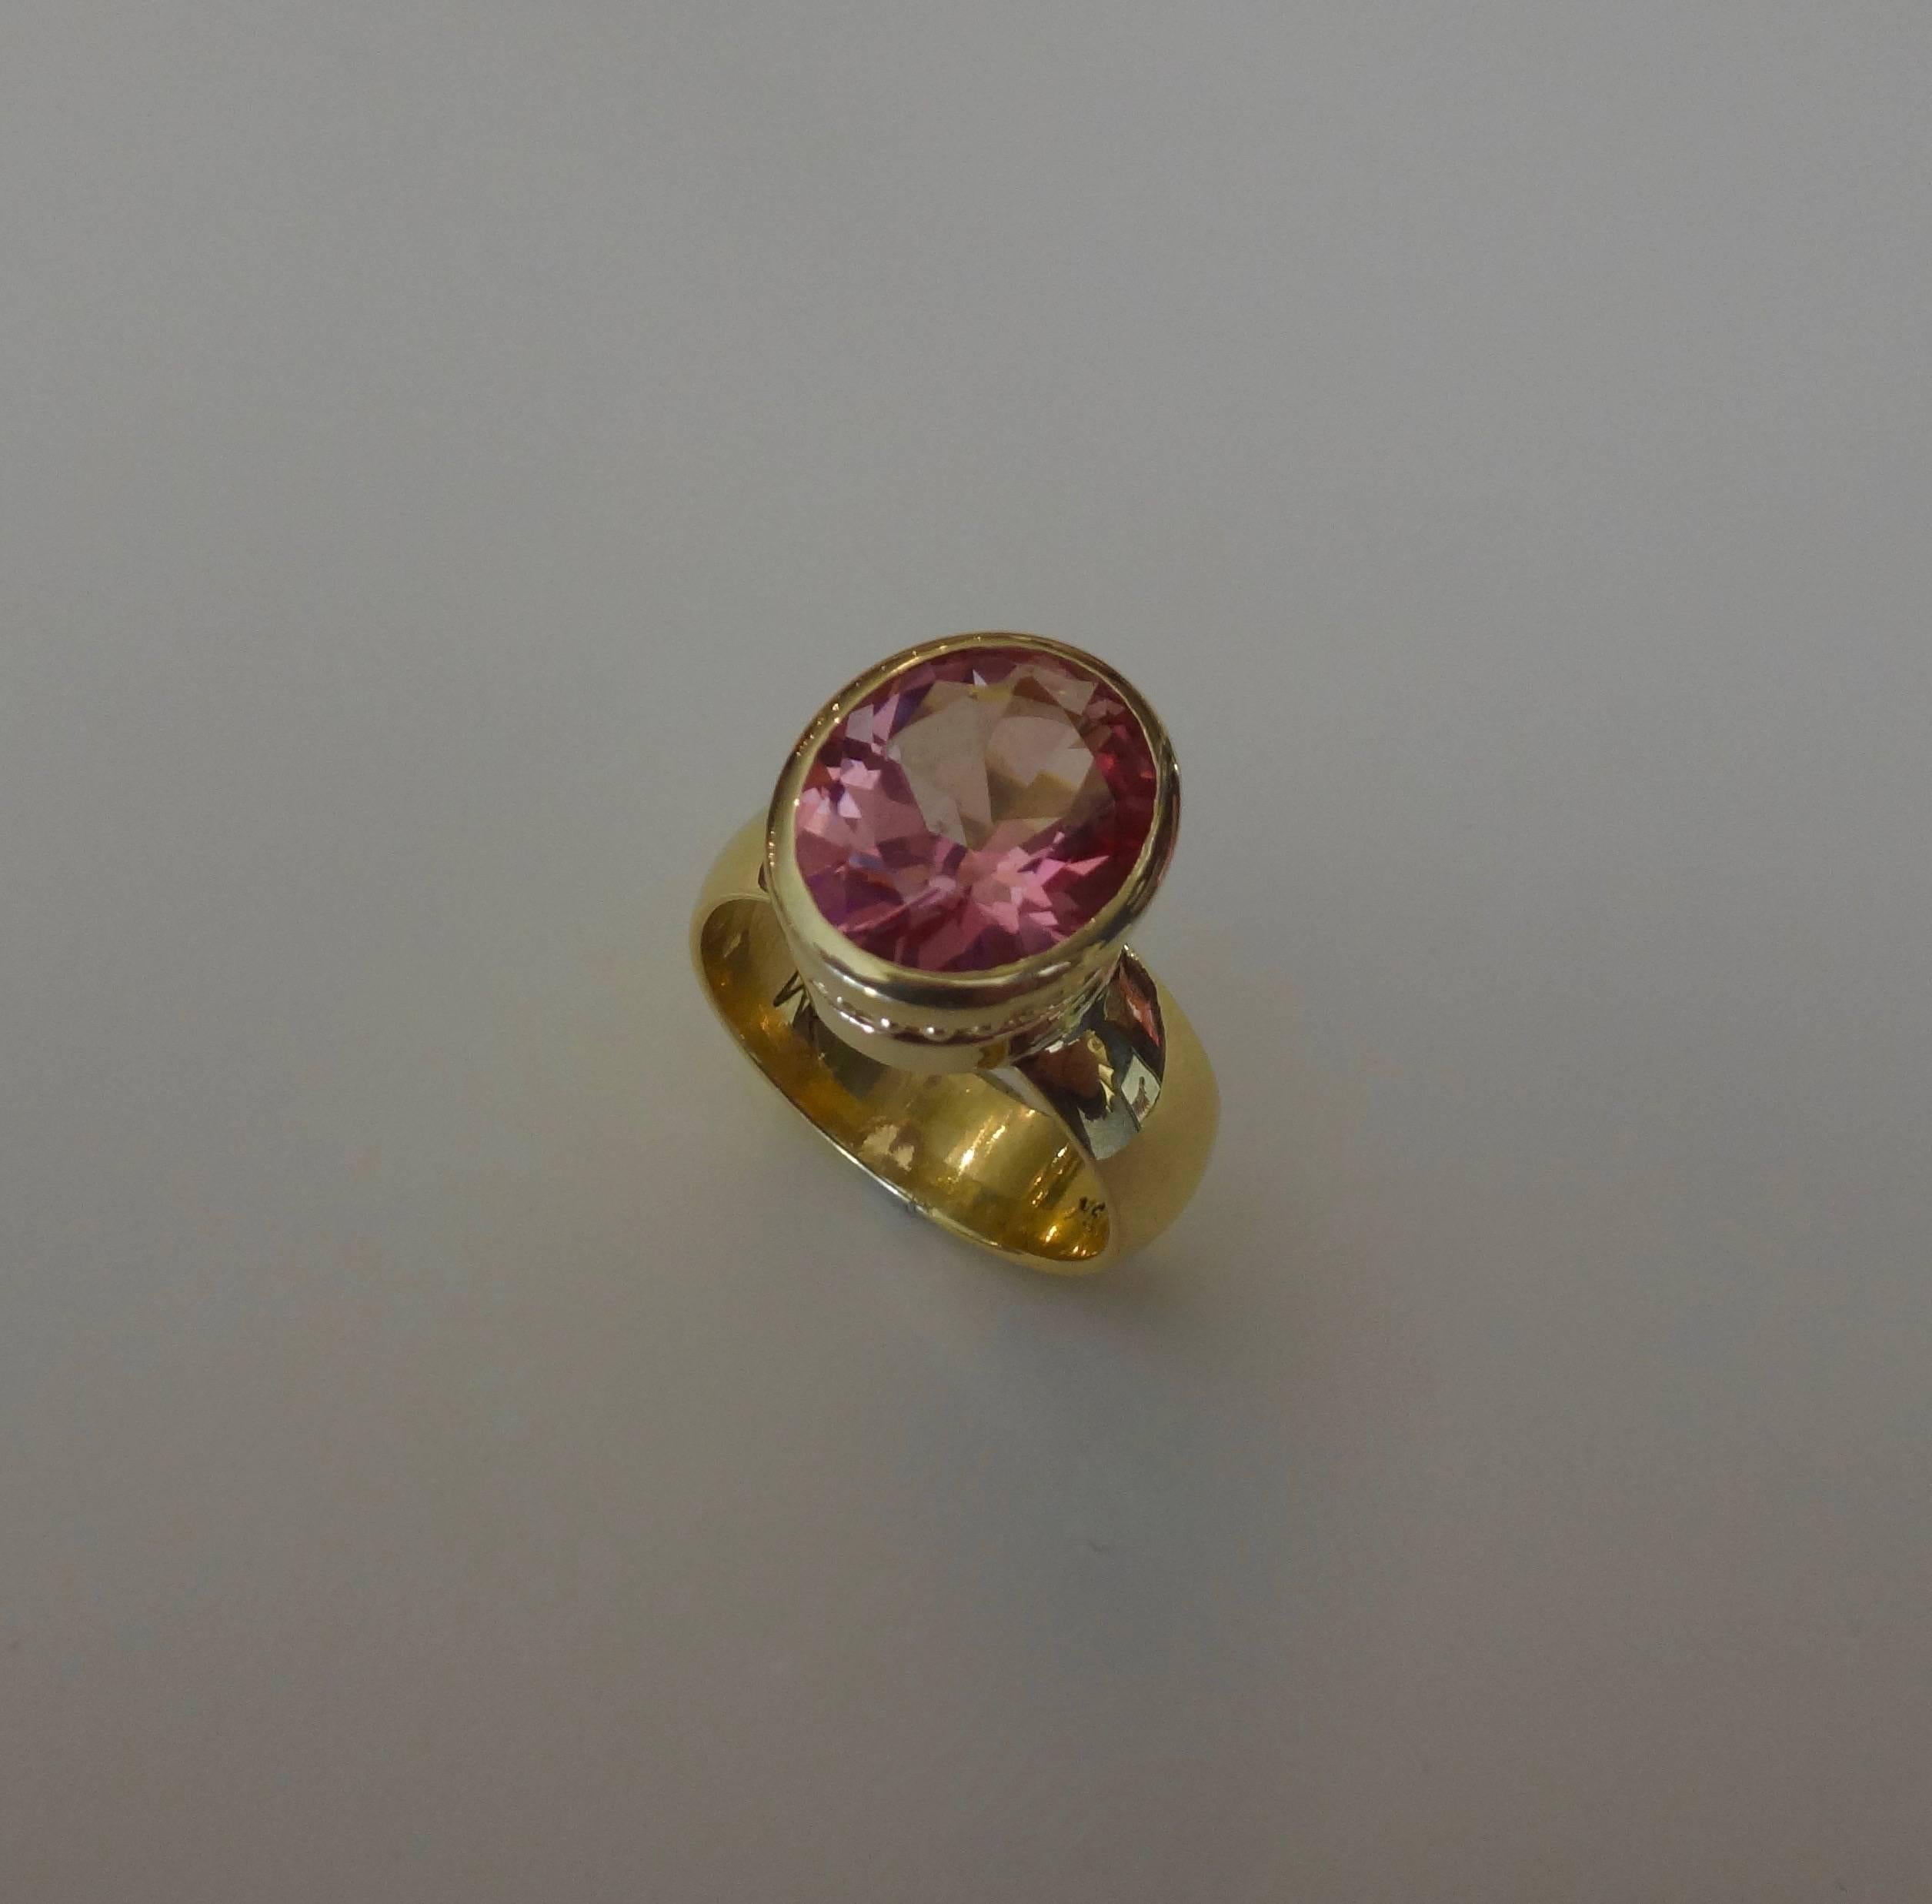 Delicately colored and beautifully cut, a pink topaz is featured in Michael Kneebone's iconic Leah ring.  The gem is set in eighteen karat yellow gold with beaded detail around the bezel.  This ring is lovely when worn alone or may be paired with